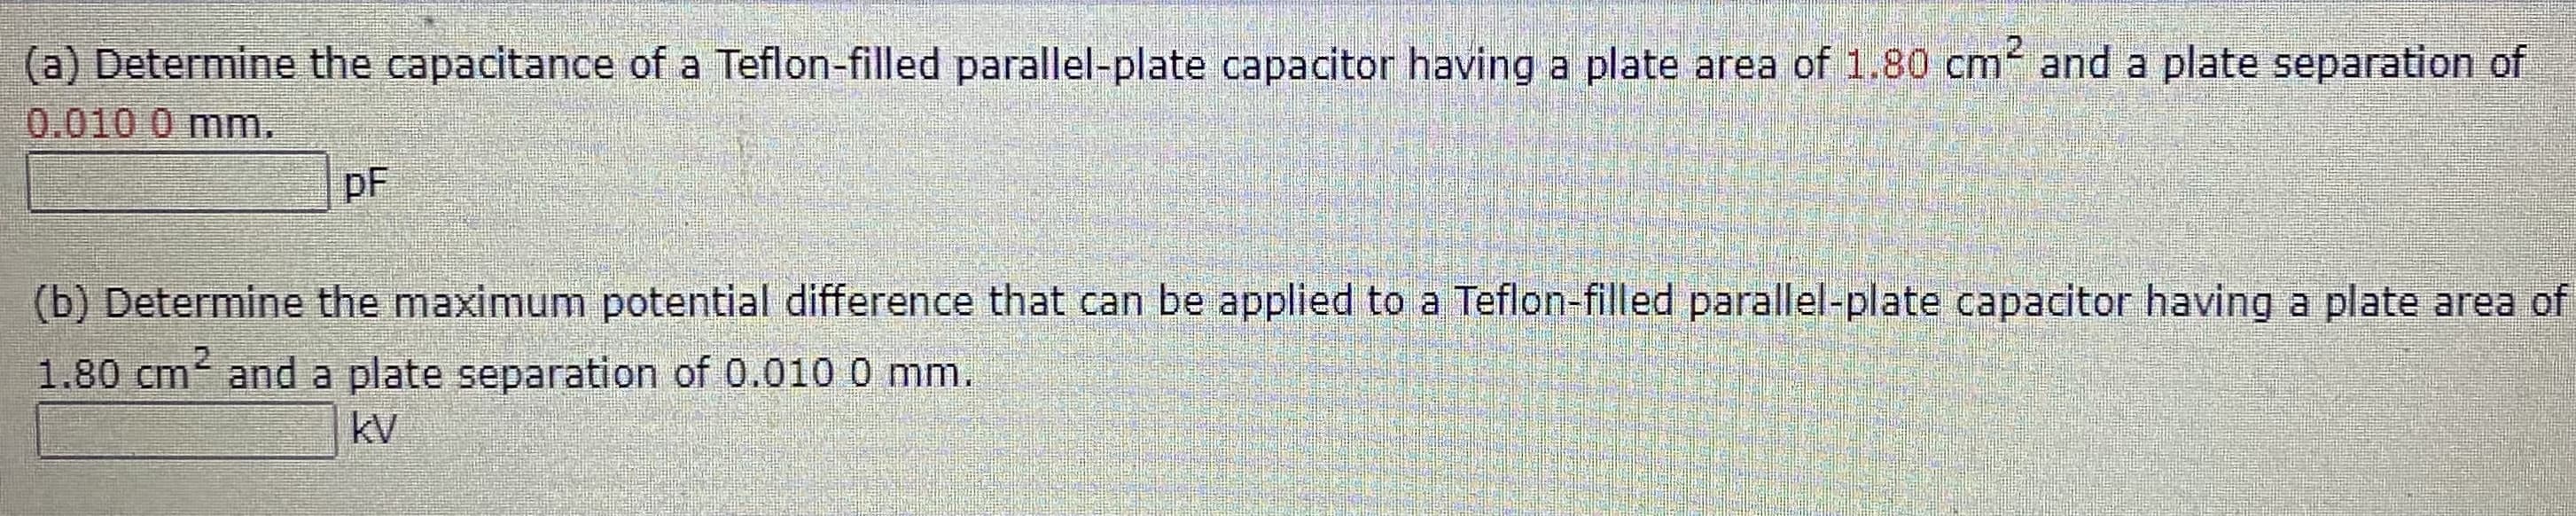 2
(a) Determine the capacitance of a Teflon-filled parallel-plate capacitor having a plate area of 1.80 cm and a plate separation of
0.010 0 mm.
pF
(b) Determine the maximum potential difference that can be applied to a Teflon-filled parallel-plate capacitor having a plate area of
1.80 cm and a plate separation of 0.0100 mm.
kV
